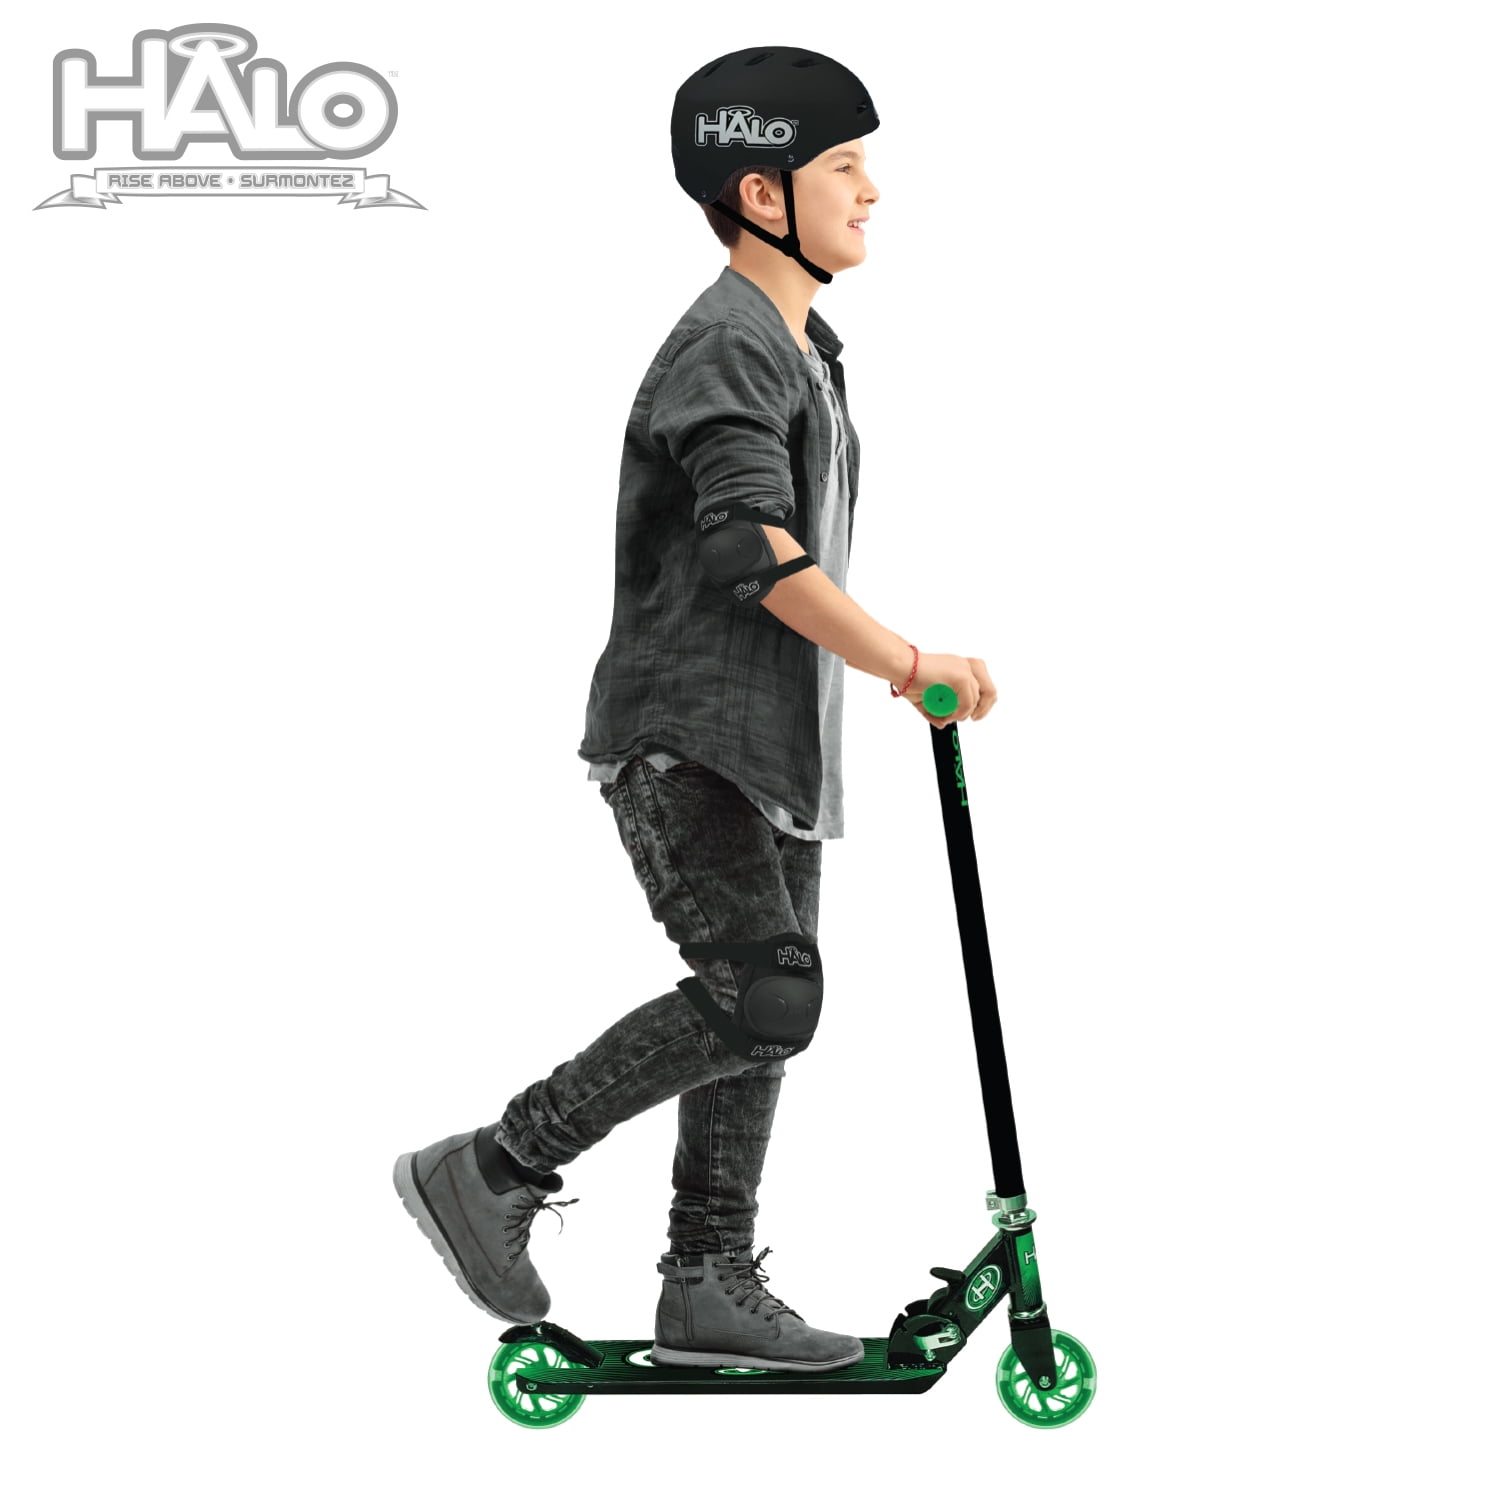 HALO Rise Above Supreme Inline - Green & Black - for All Riders (Unisex) - Walmart.com